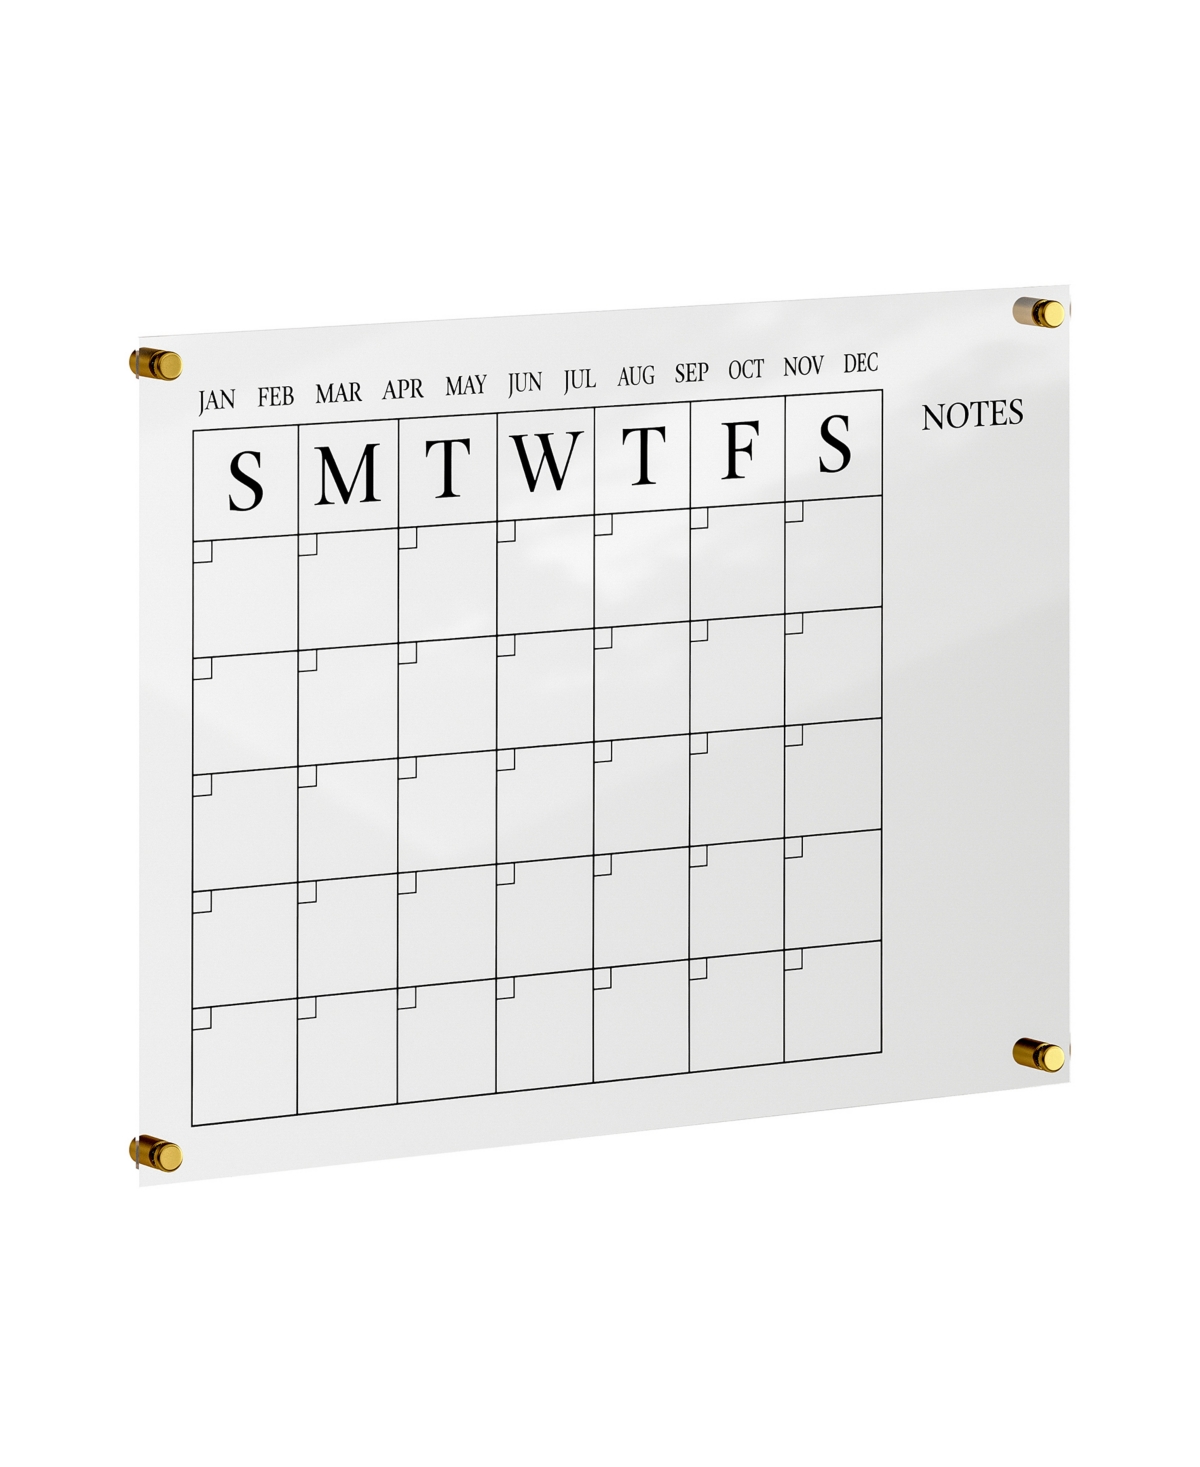 Grayson Acrylic Wall Calendar with Notes with Dry Erase Marker and Mounting Hardware, 24" x 18" - Clear, Black